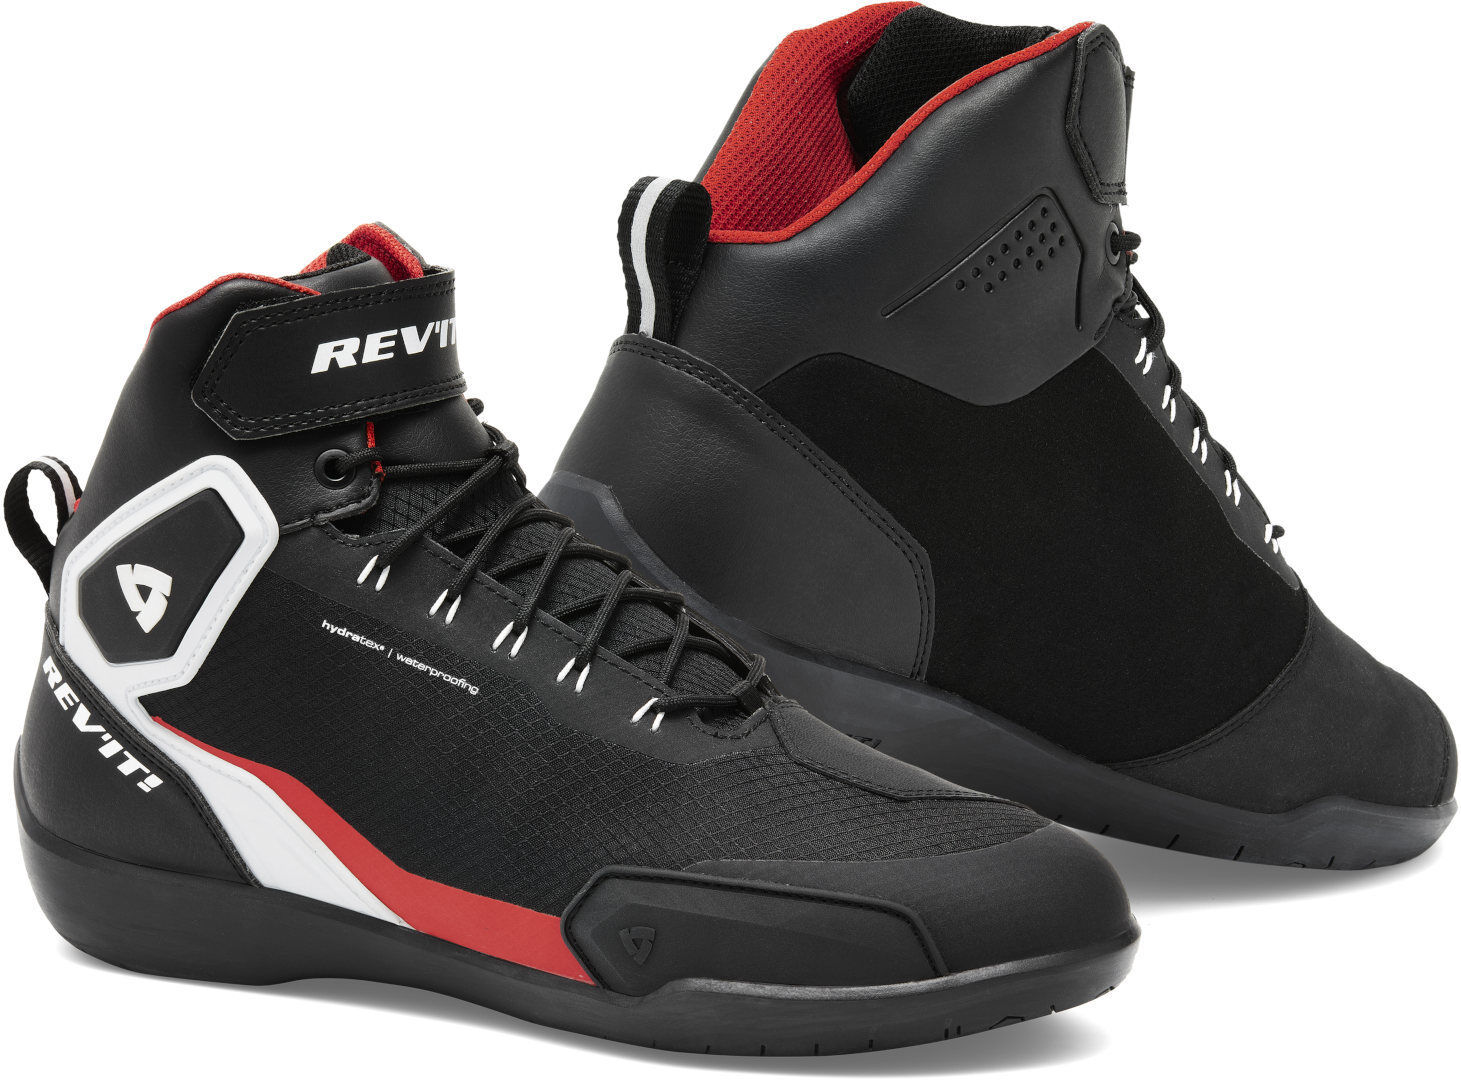 Revit G-Force H2o Waterproof Motorcycle Shoes  - Black White Red